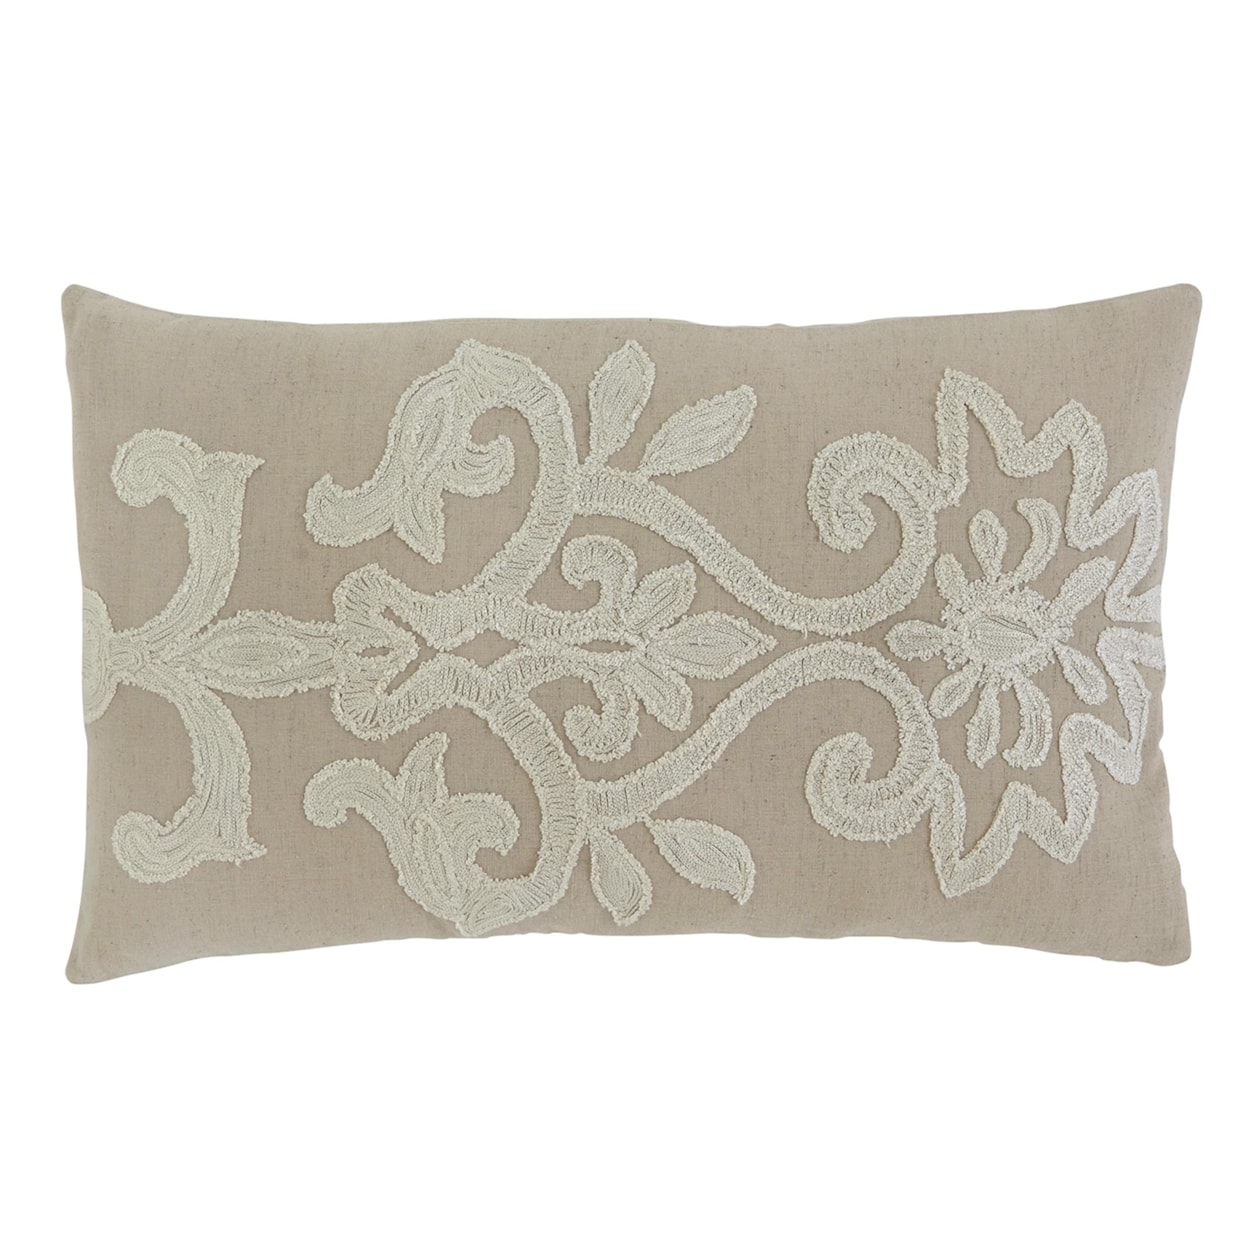 Signature Design by Ashley Pillows Embroidered - Beige Lumbar Pillow, Set of 4